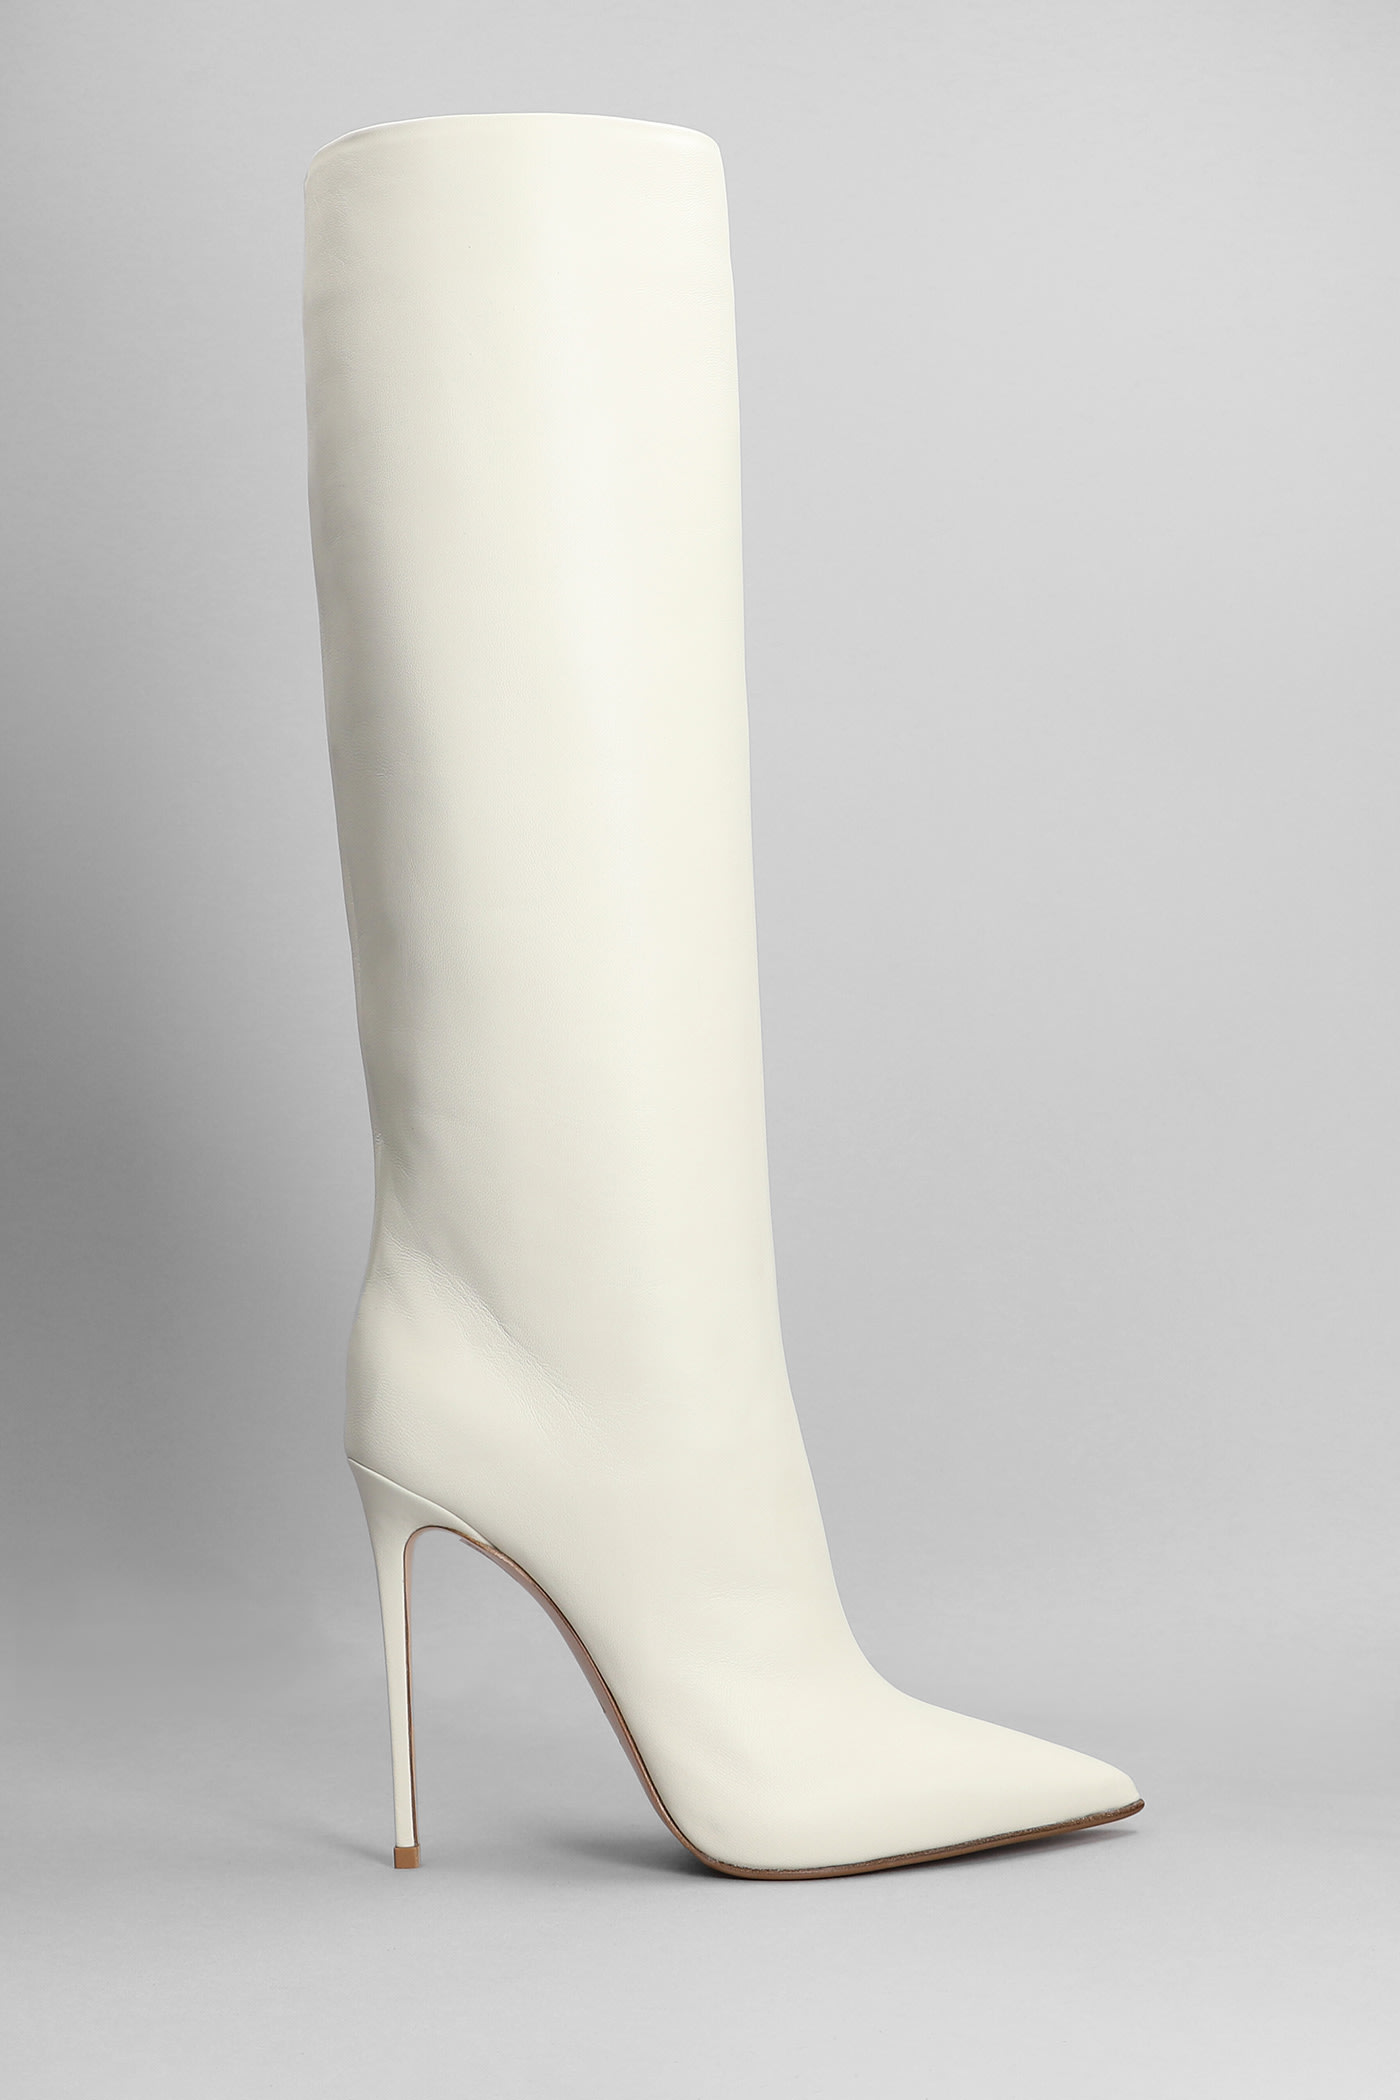 Le Silla Eva 120 High Heels Boots In Beige Leather